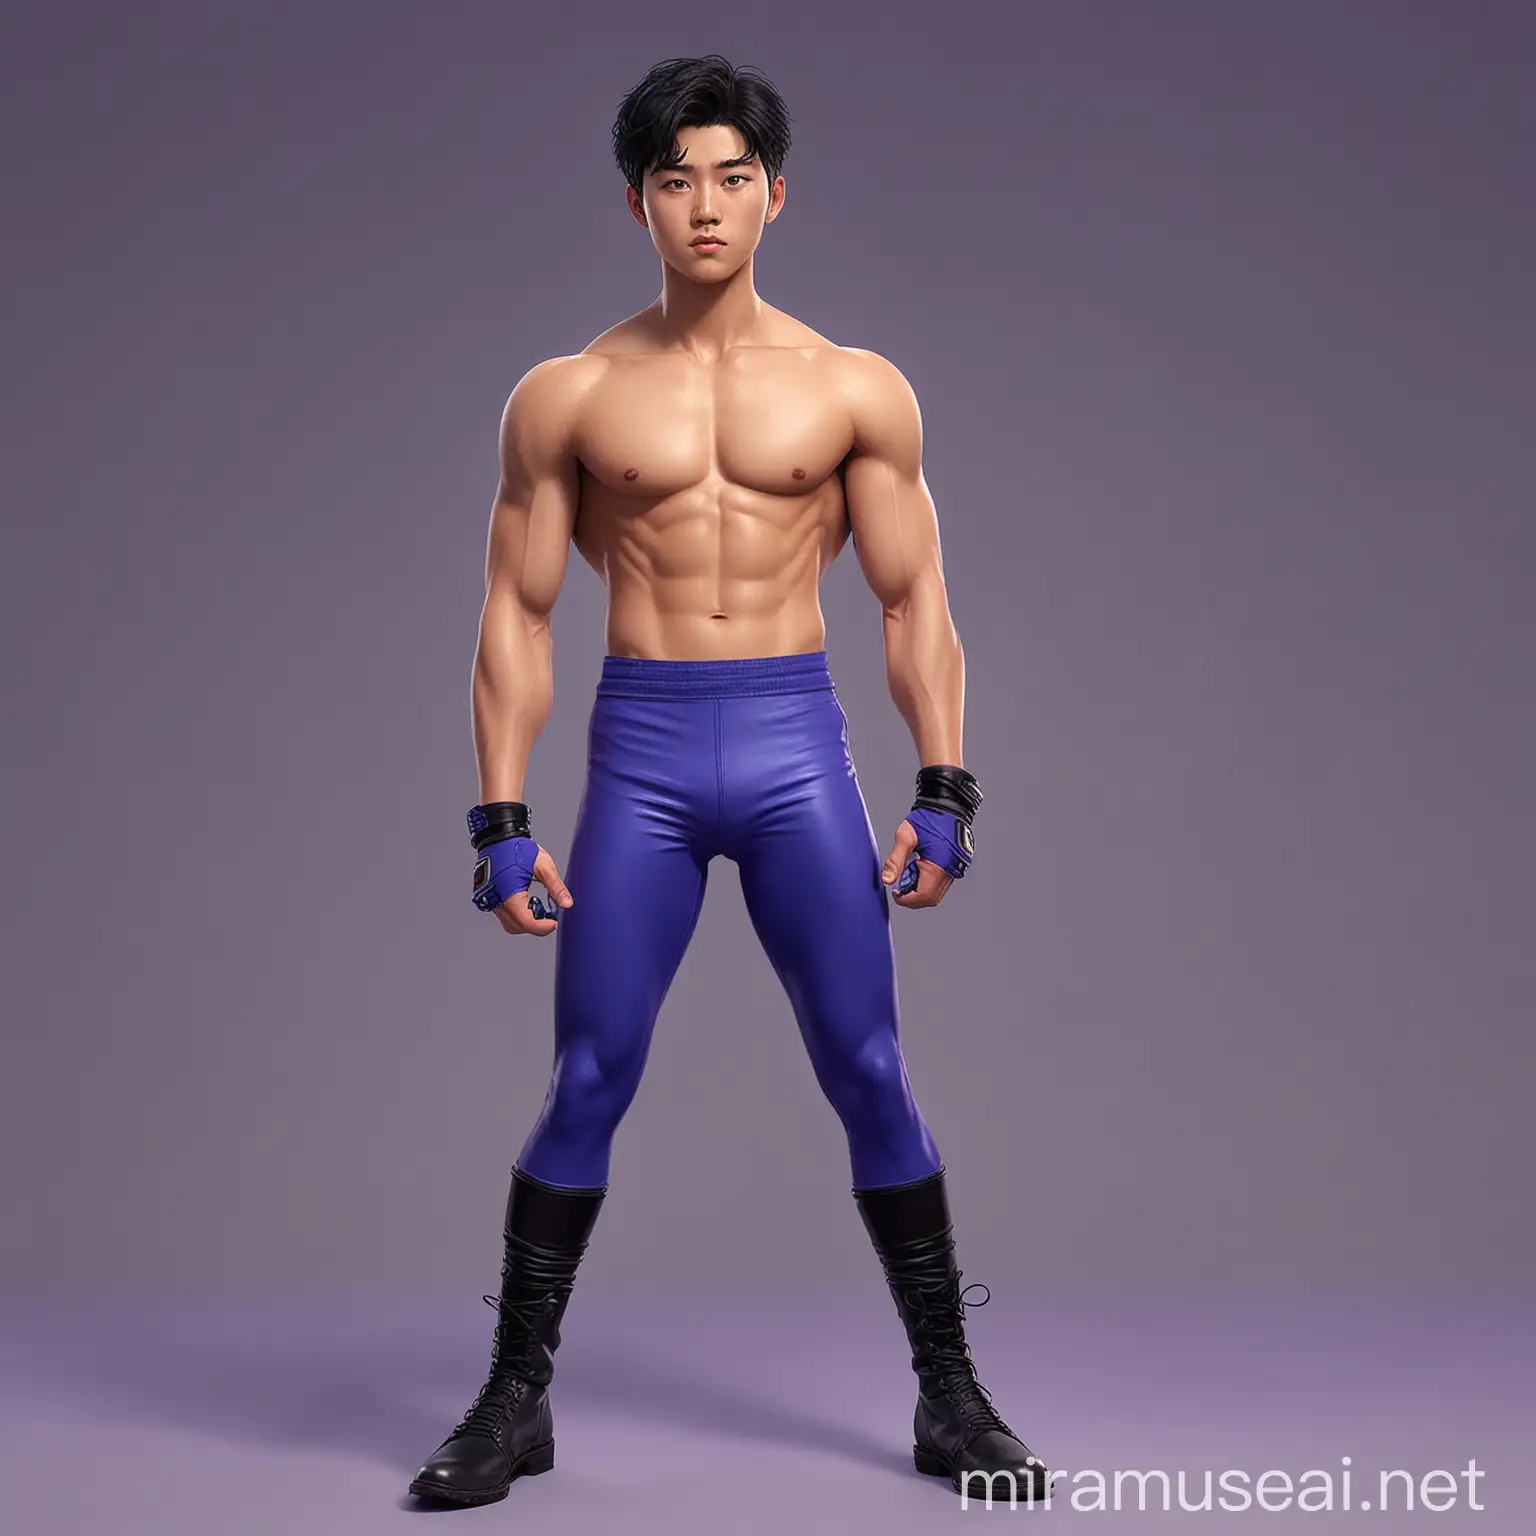 Charming fit shirtless 18 year old male South Korean fighter, with short  black hair , pointed eyebrows, tan skin; wearing long cobalt blue (leaning to purple)/black spandex leggings; black boots and wristbands, in pixar art style.